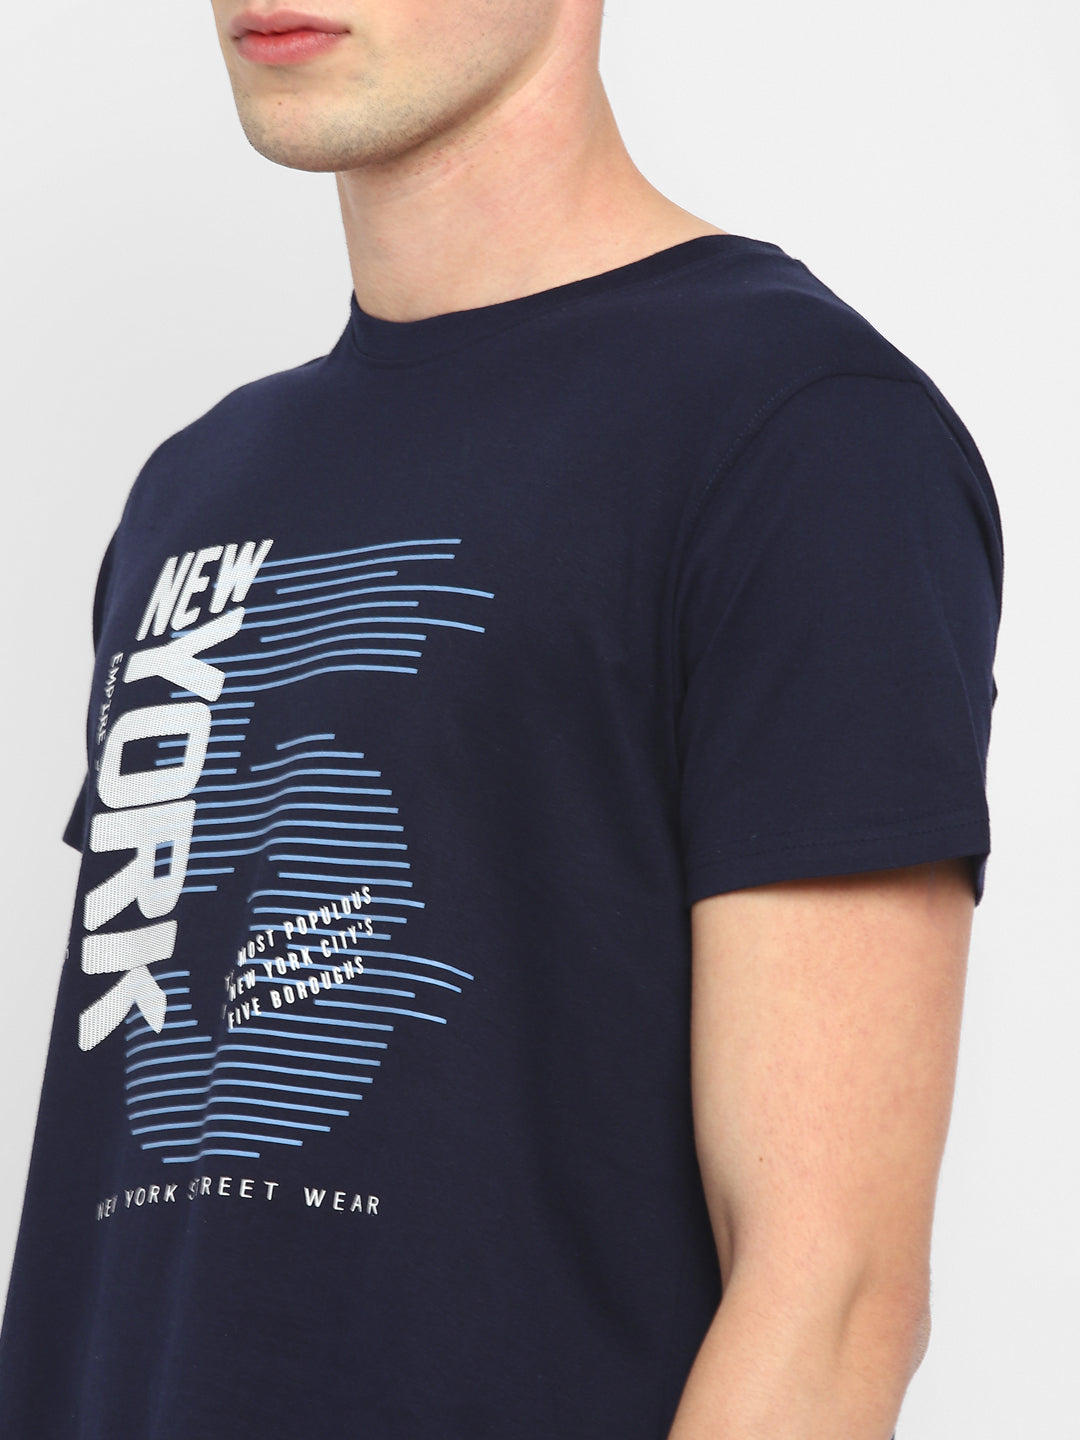 100% Cotton Printed Round Neck T-Shirt for Men - Navy